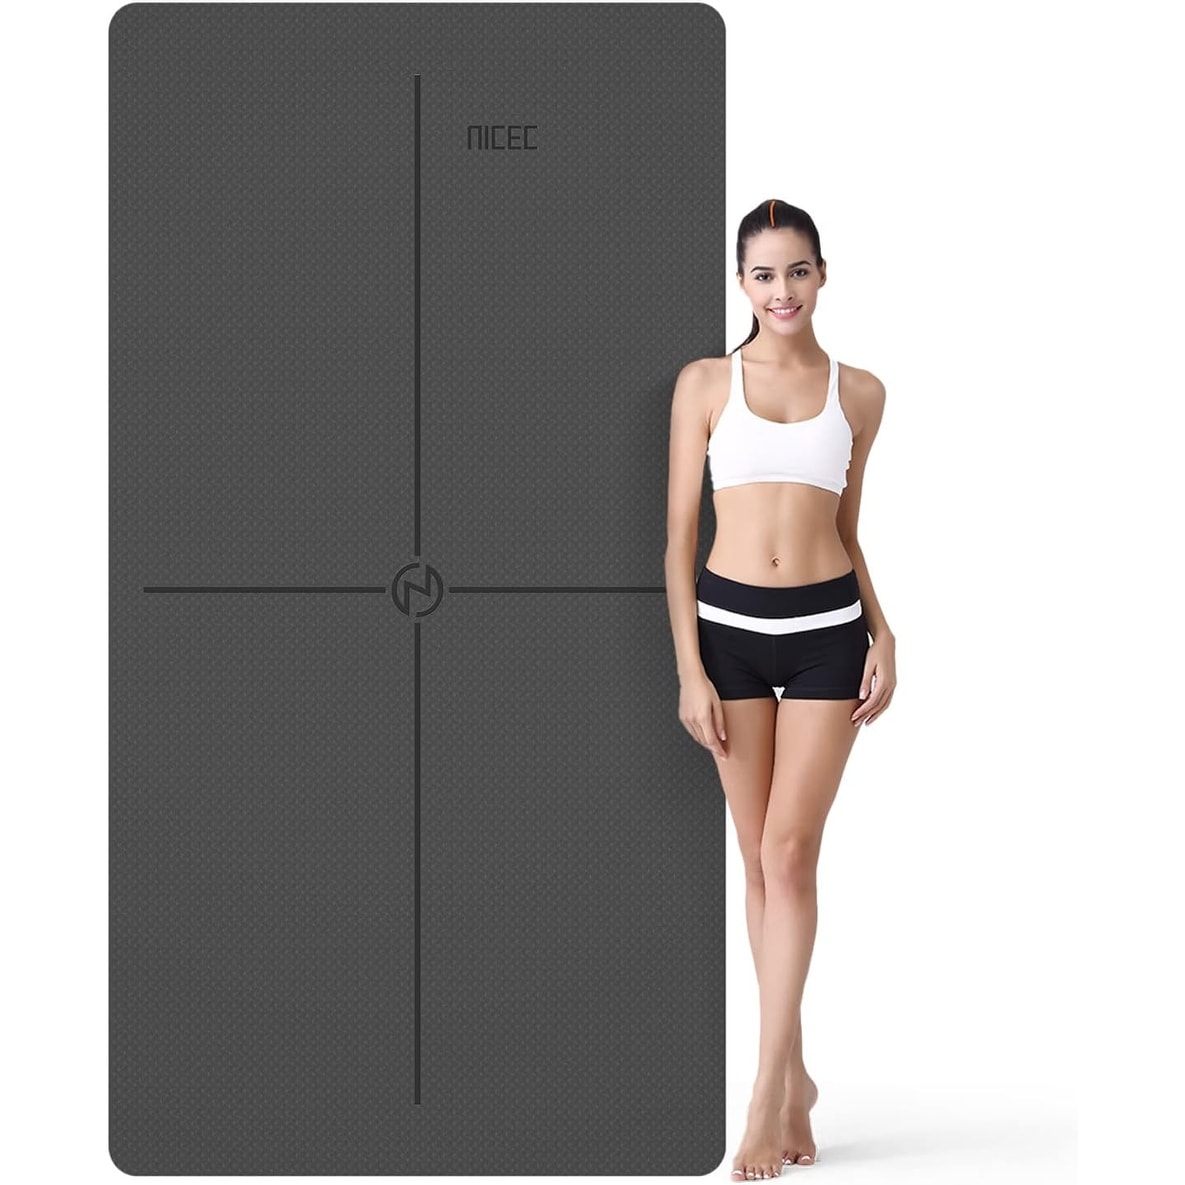 https://ak1.ostkcdn.com/images/products/is/images/direct/16b64cf32513d5af7b2c5f9b7f4a1ba8e2d00ae9/Yoga-Mat%2C-Yoga-Mat-Thick%2C-Exercise-Mat%2C-Fitness-Mat%2C-%C2%BC-inch-Thickness-w--Alignment-Marks%2C-Non-slip%2C-Soft-Padding-for-Yoga%2C-Gym.jpg